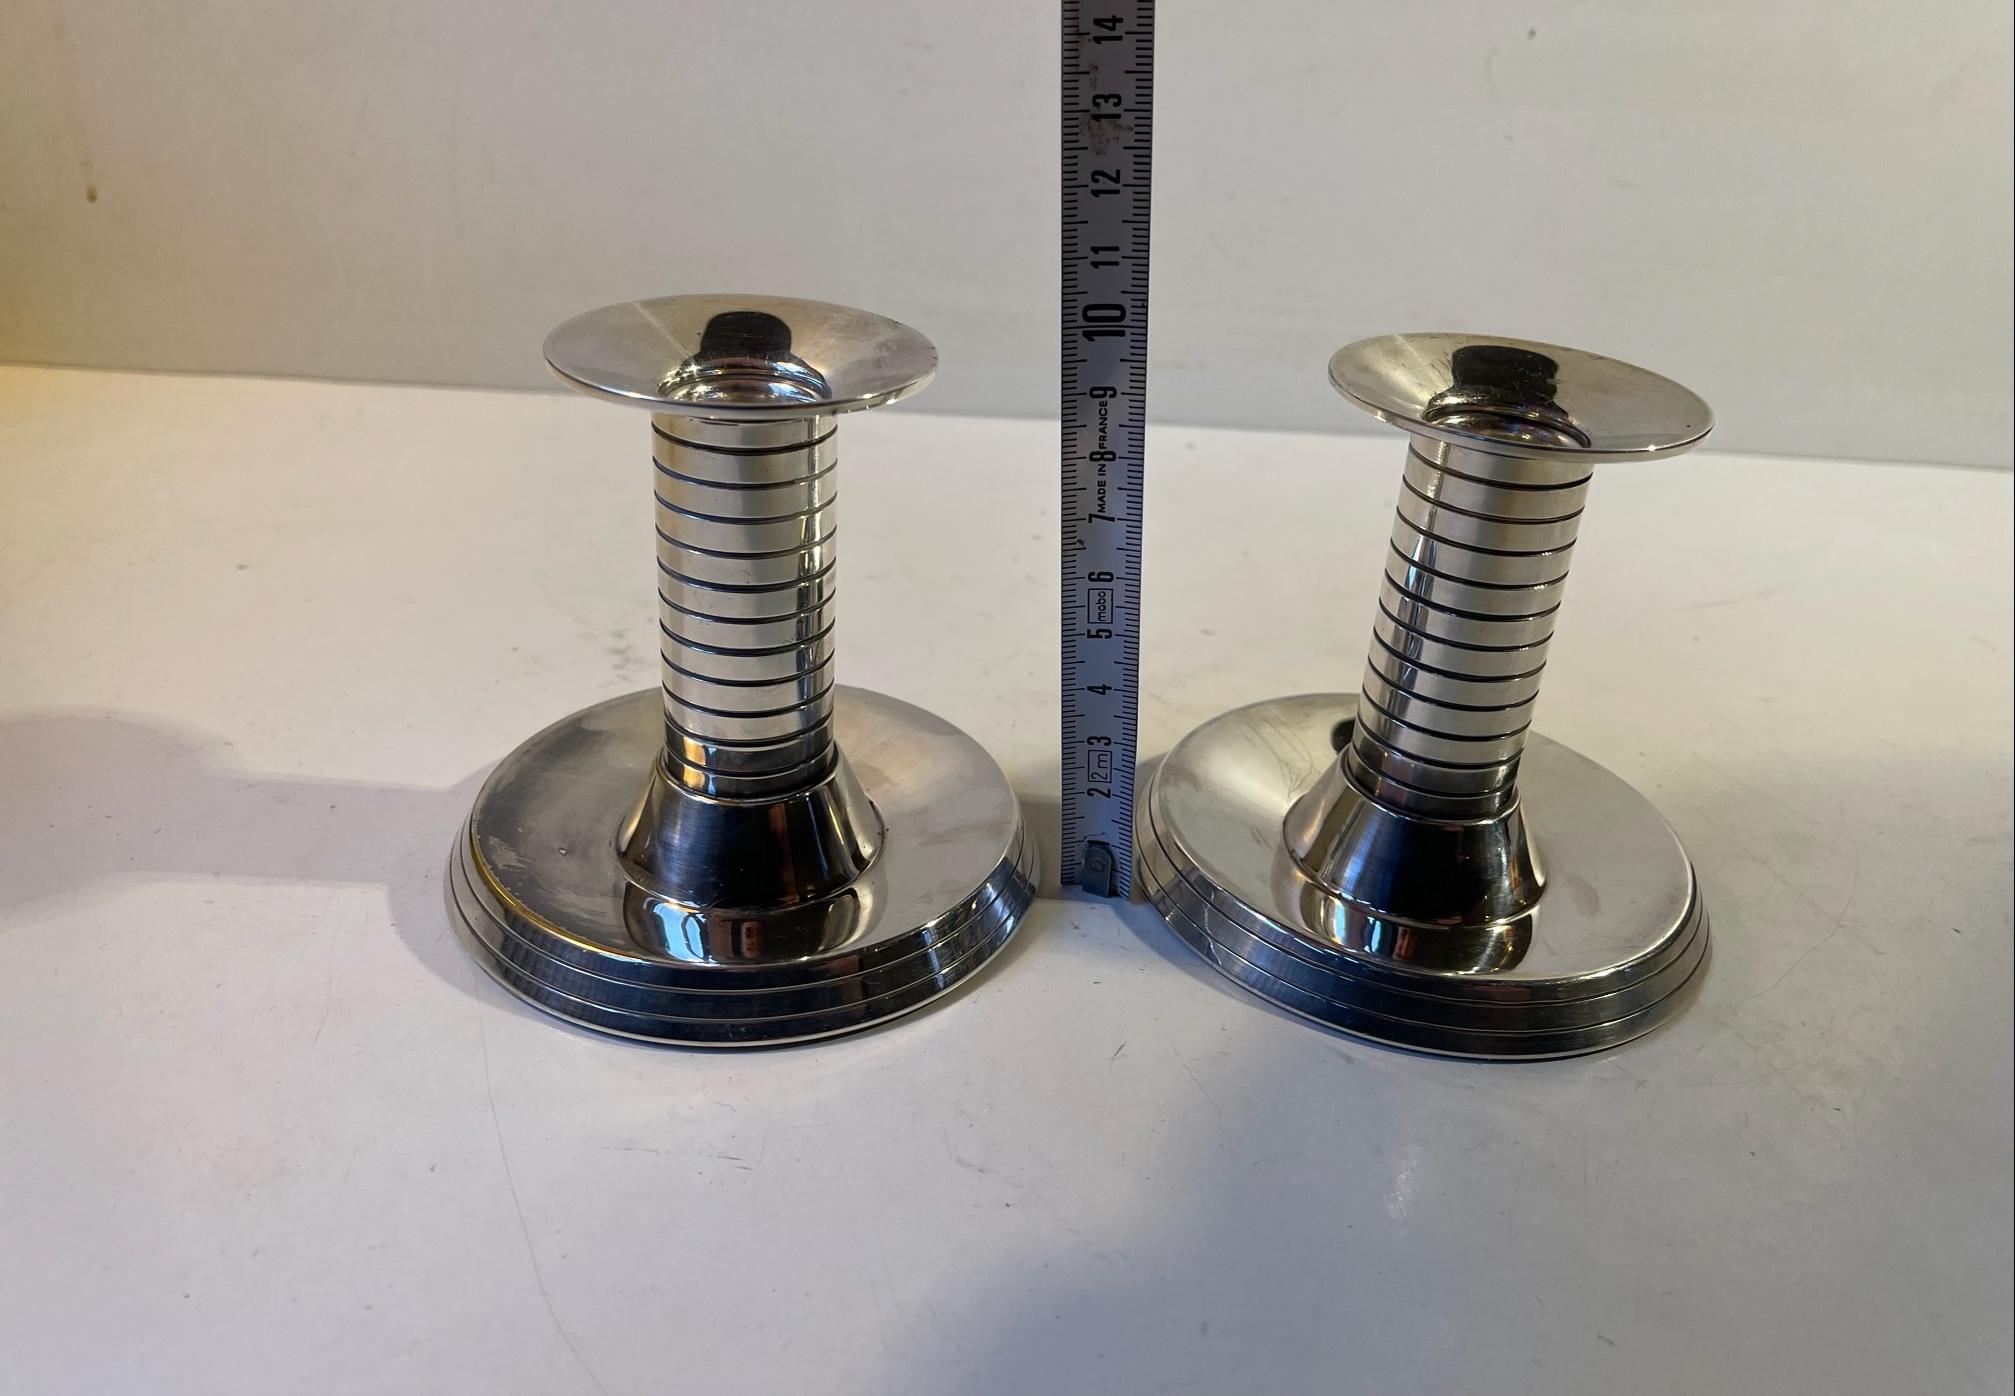 Silver Plate Art Deco Candlesticks in Plated Silver from Carl F. Christensen, 1920s For Sale